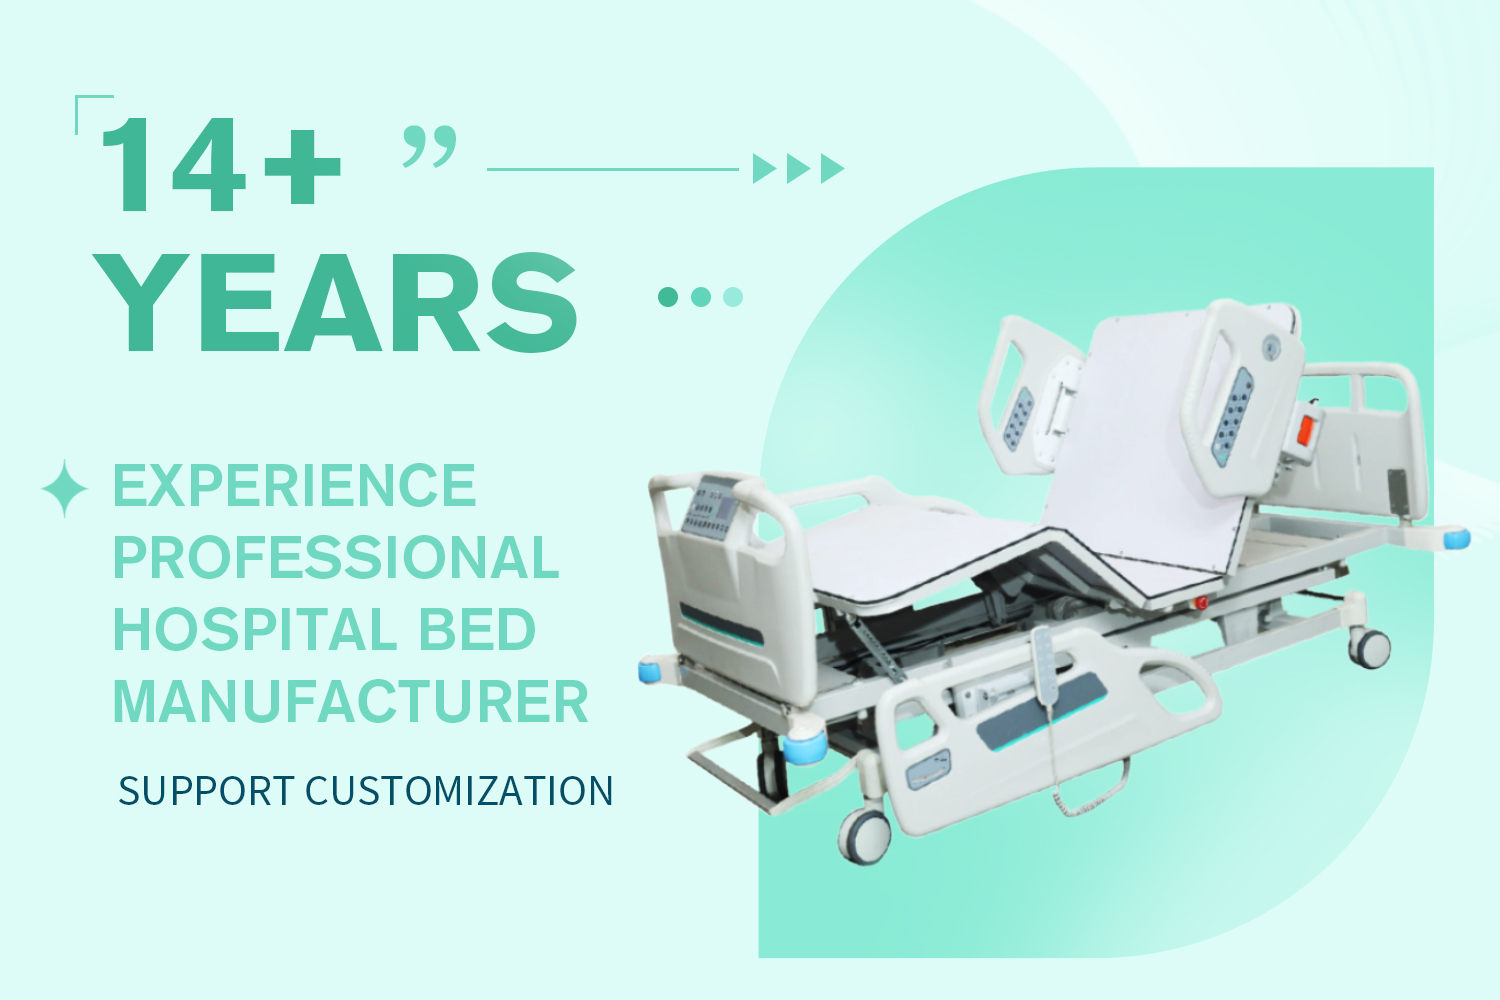 The future of smart hospital beds